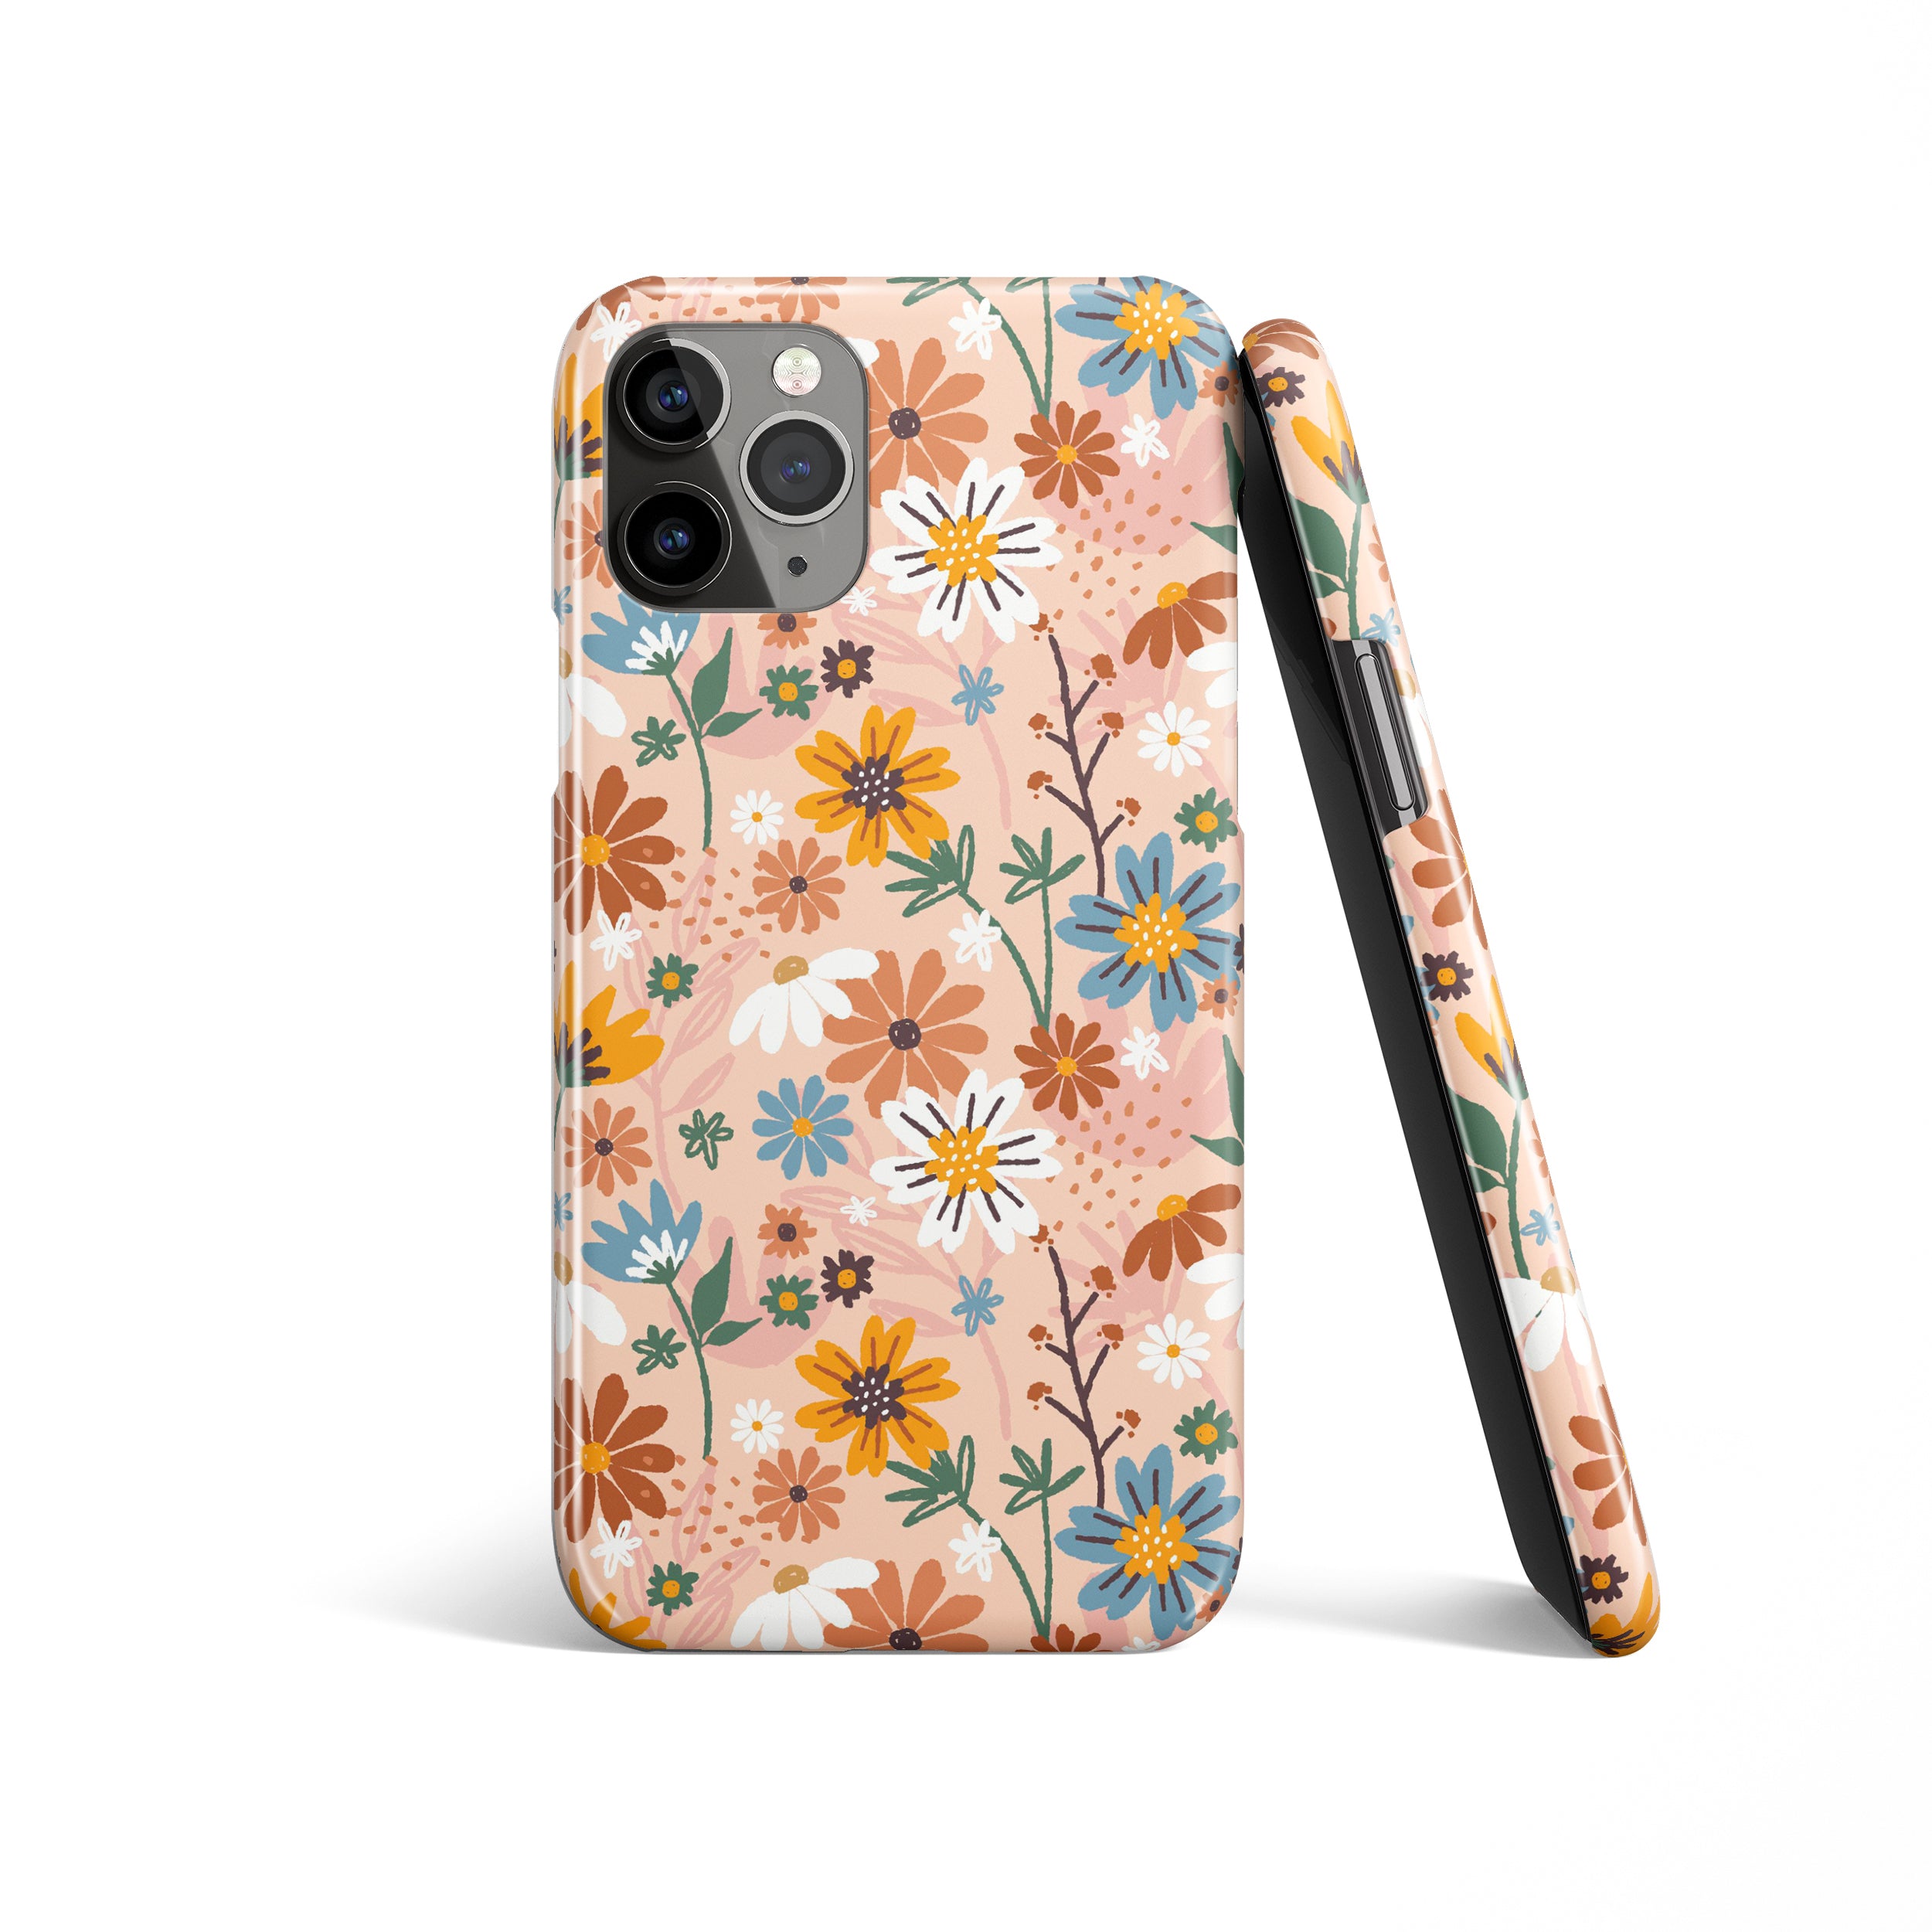 Aesthetic Floral Girly iPhone Case Samsung Case